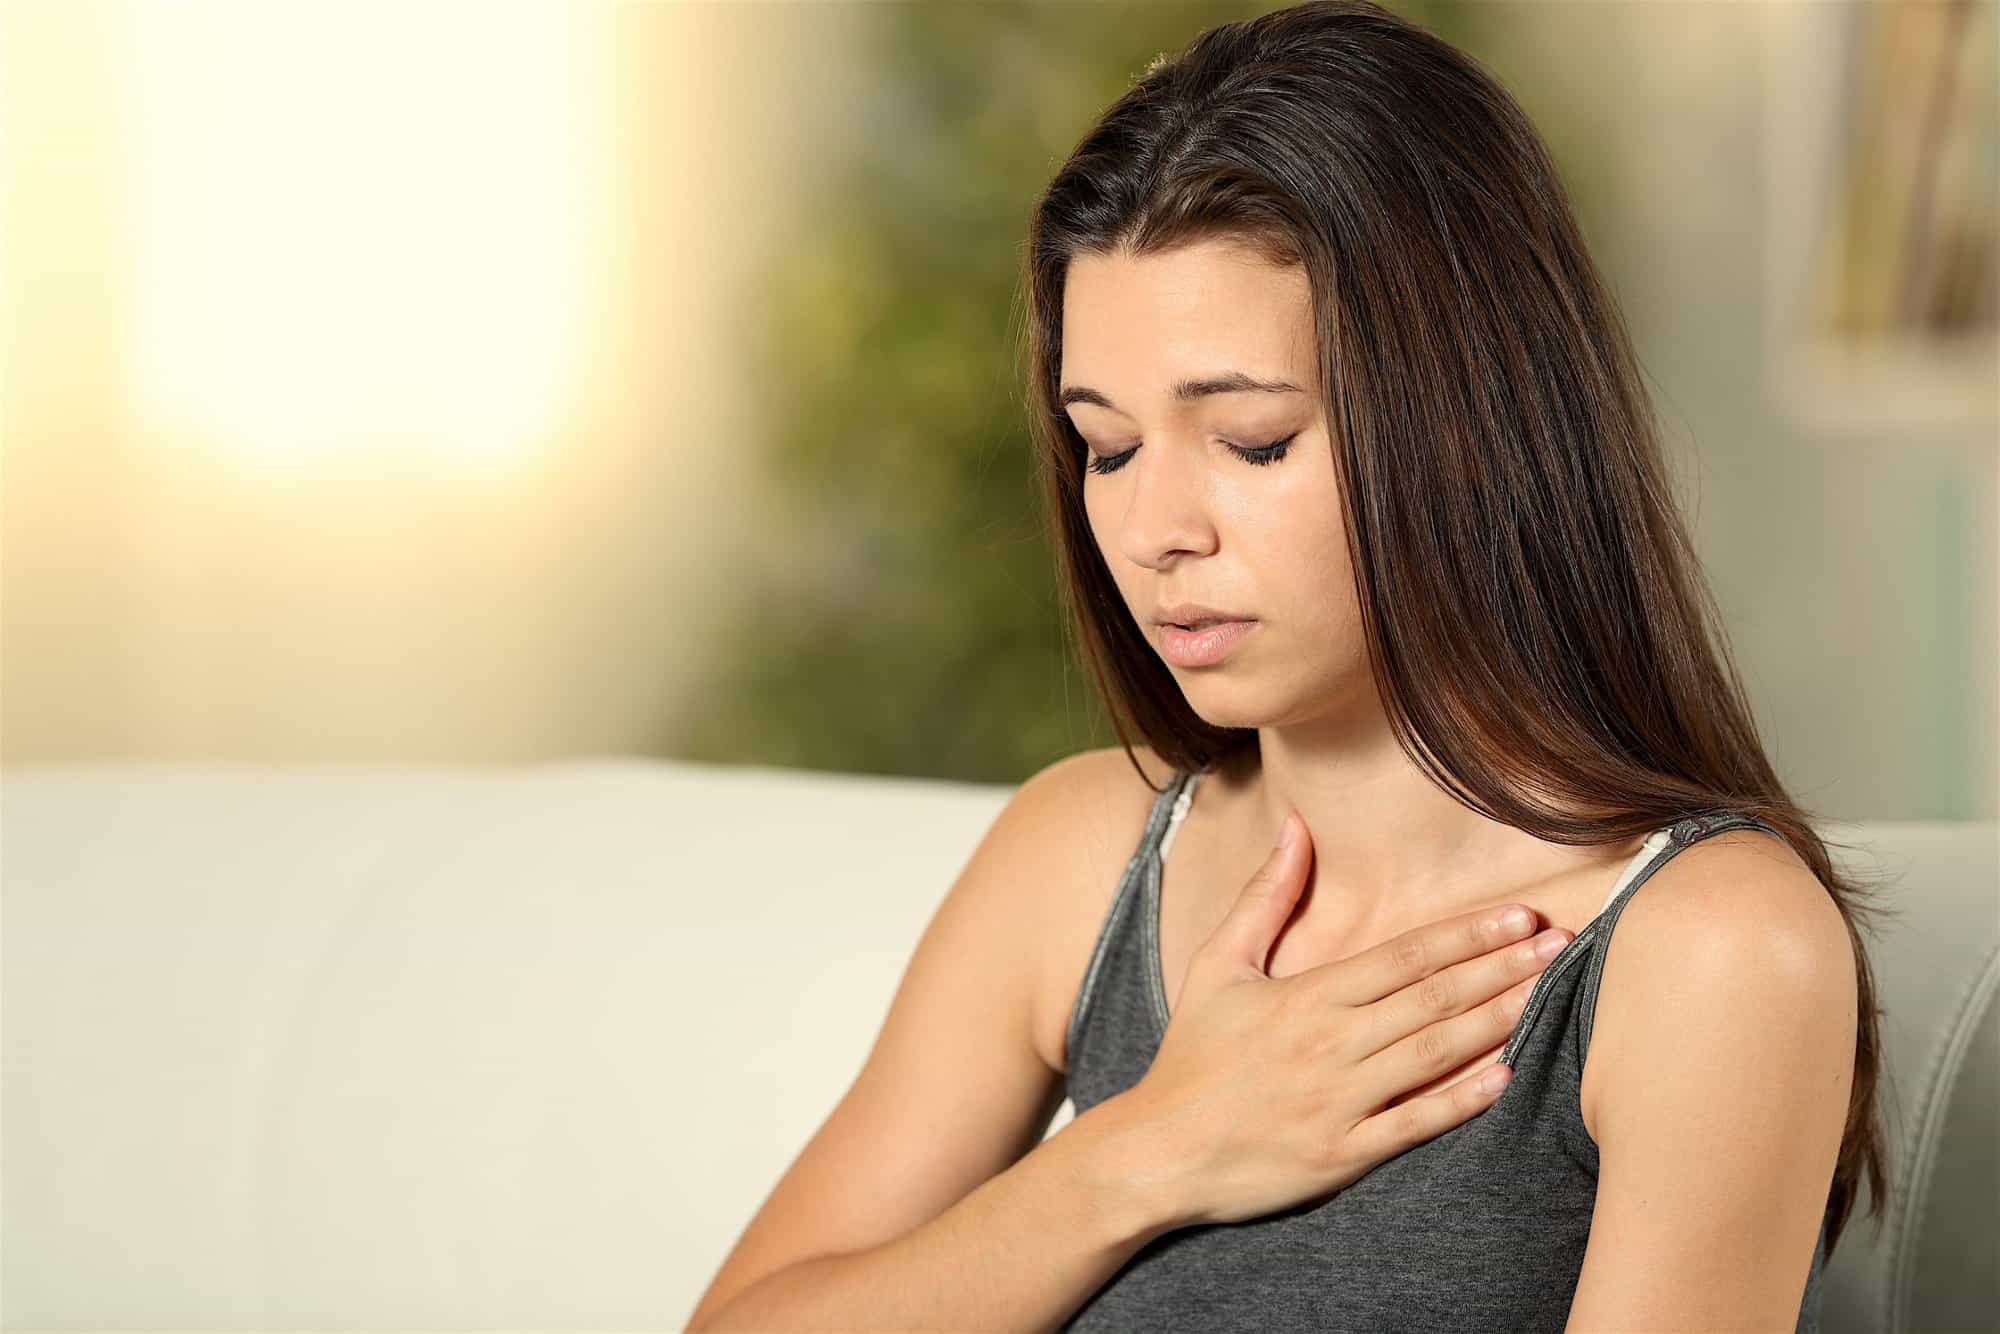 Girl Having Respiration Problems Touching Chest Sitting On A Couch In The Living Room At Home